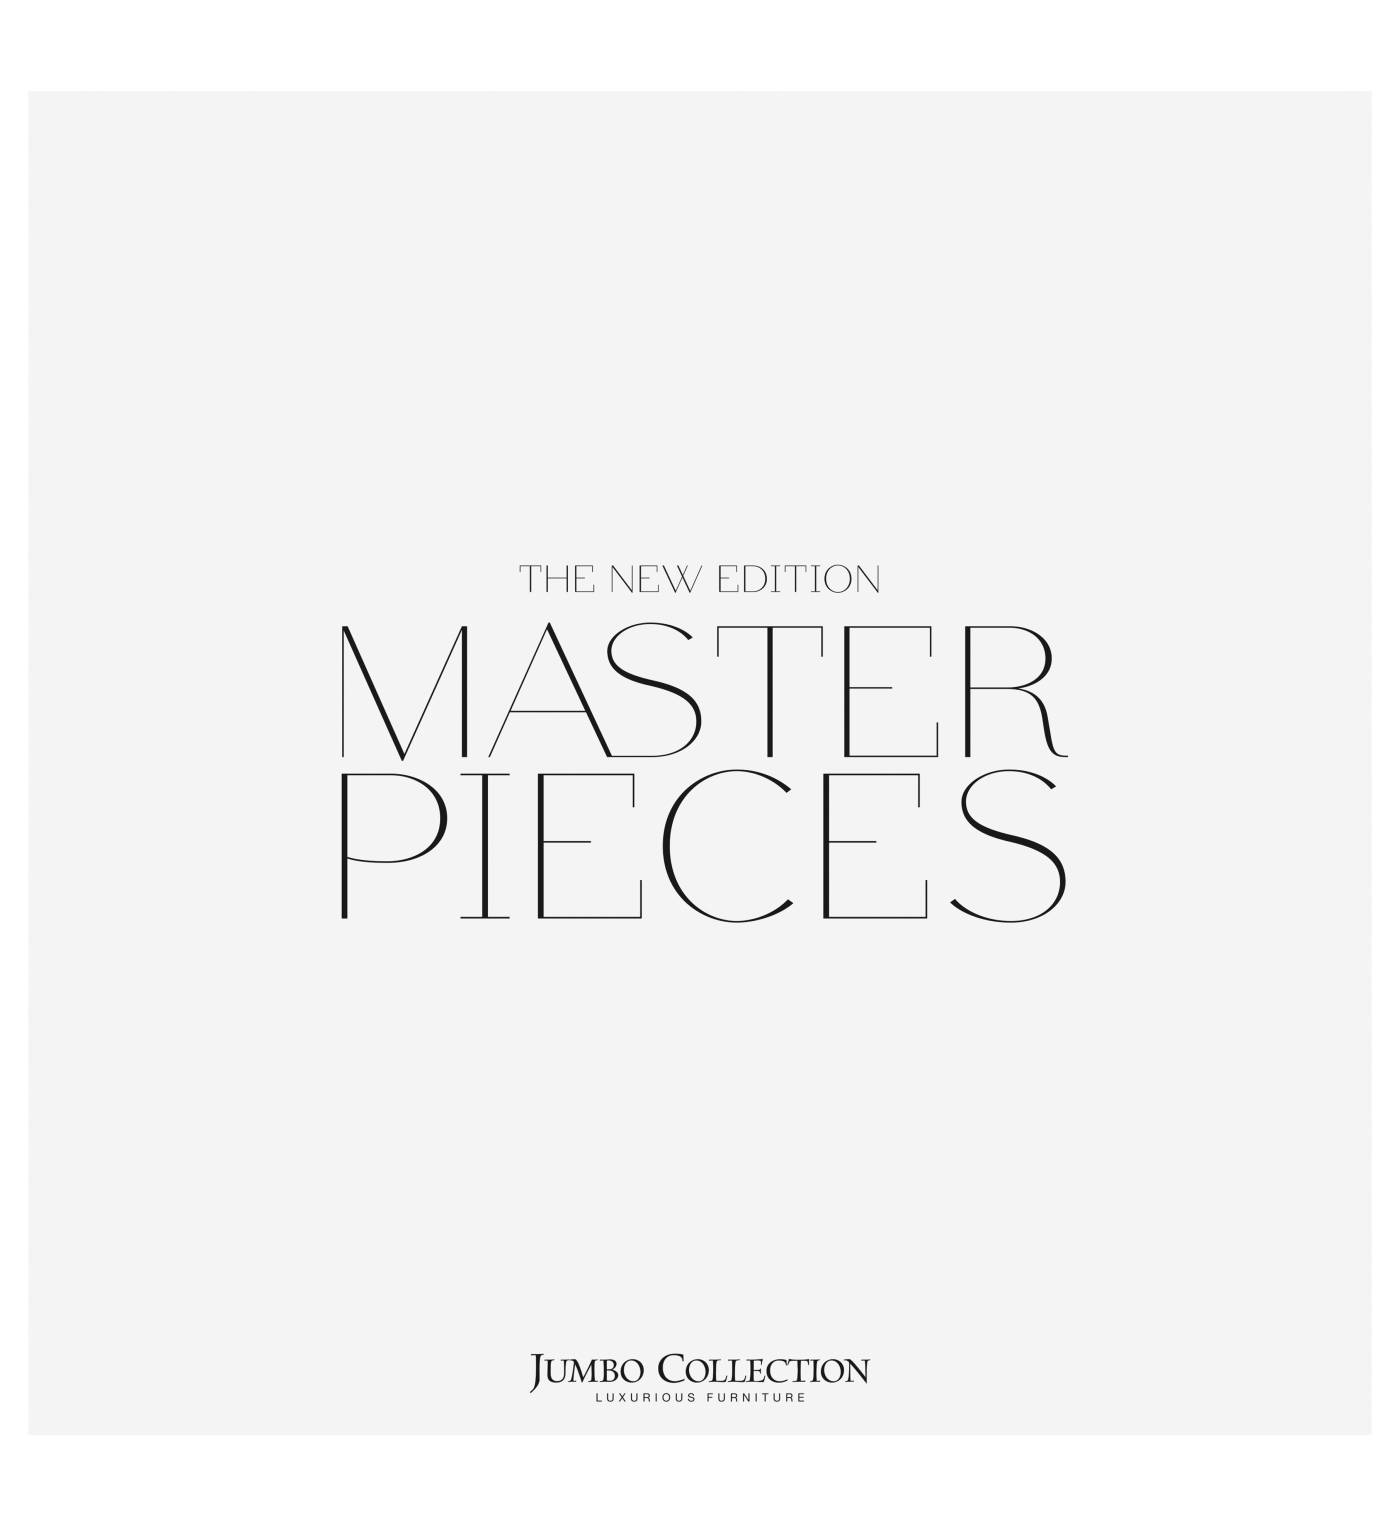 JC_2018_product-catalogue_MASTERPIECES_new-edition-1